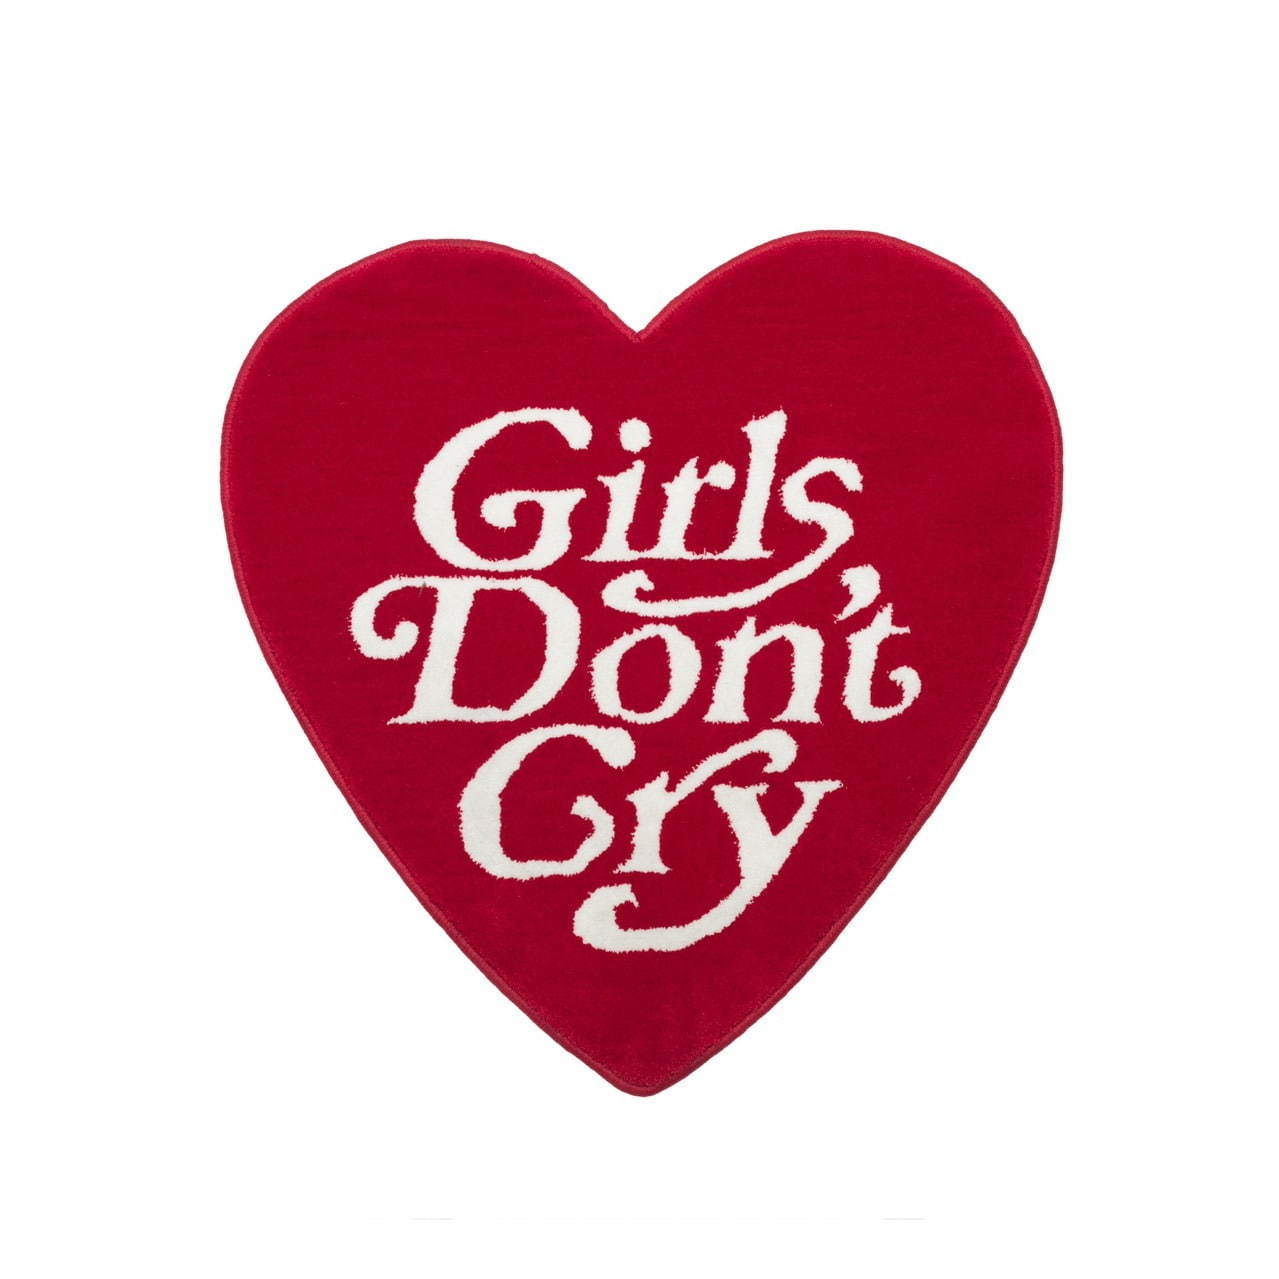 Girl's Don't Cry GDC クッション 伊勢丹 verdy